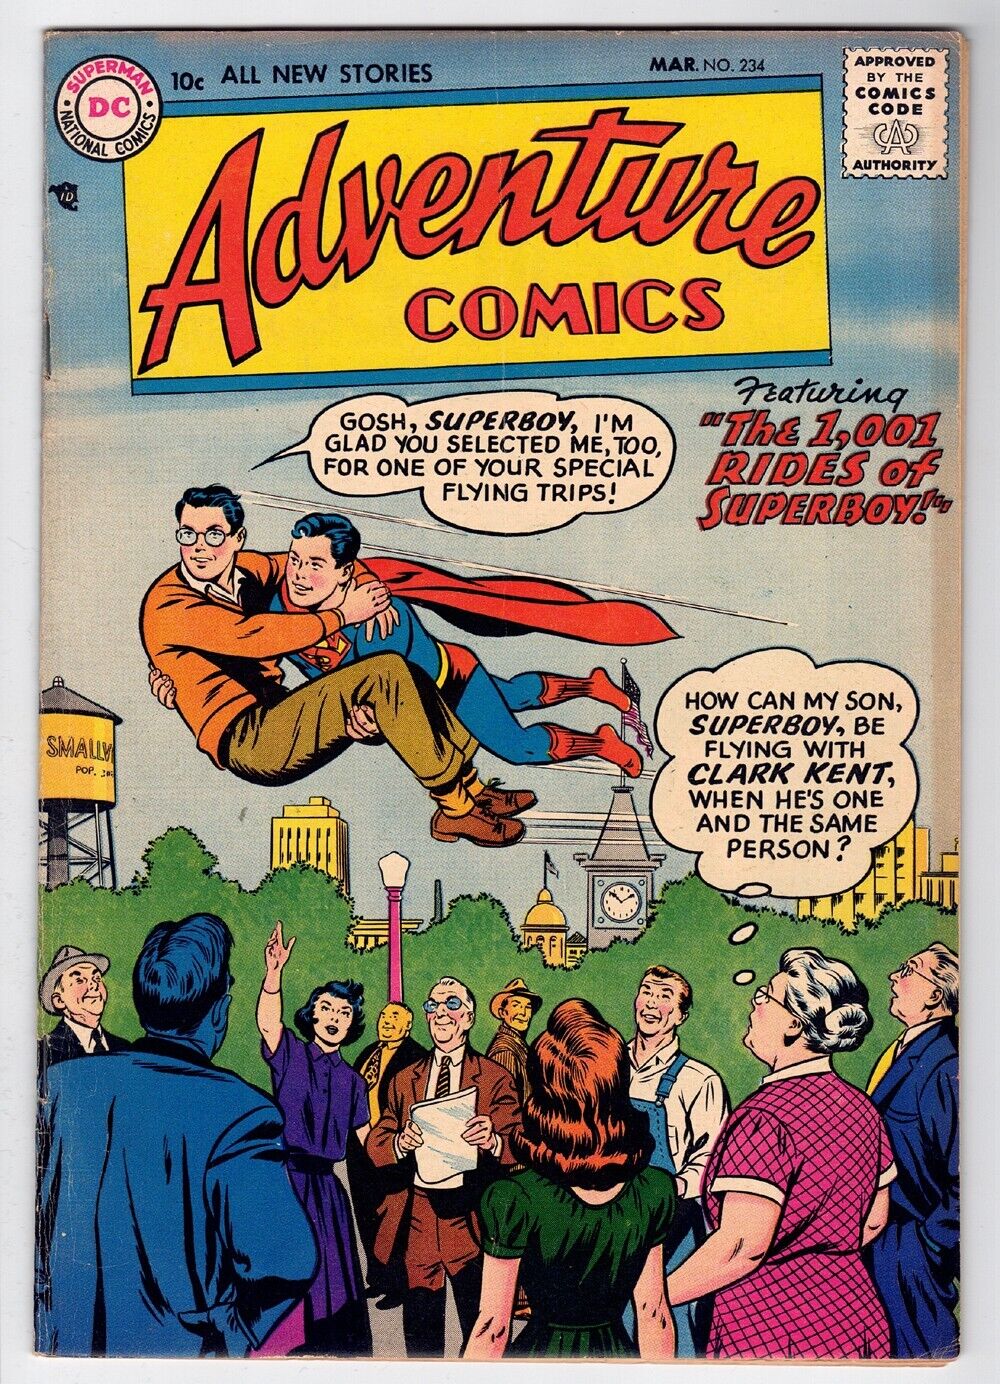 ADVENTURE COMICS #234 4.5 1957 OFF-WHITE PAGES GREG EIDE COLLECTION